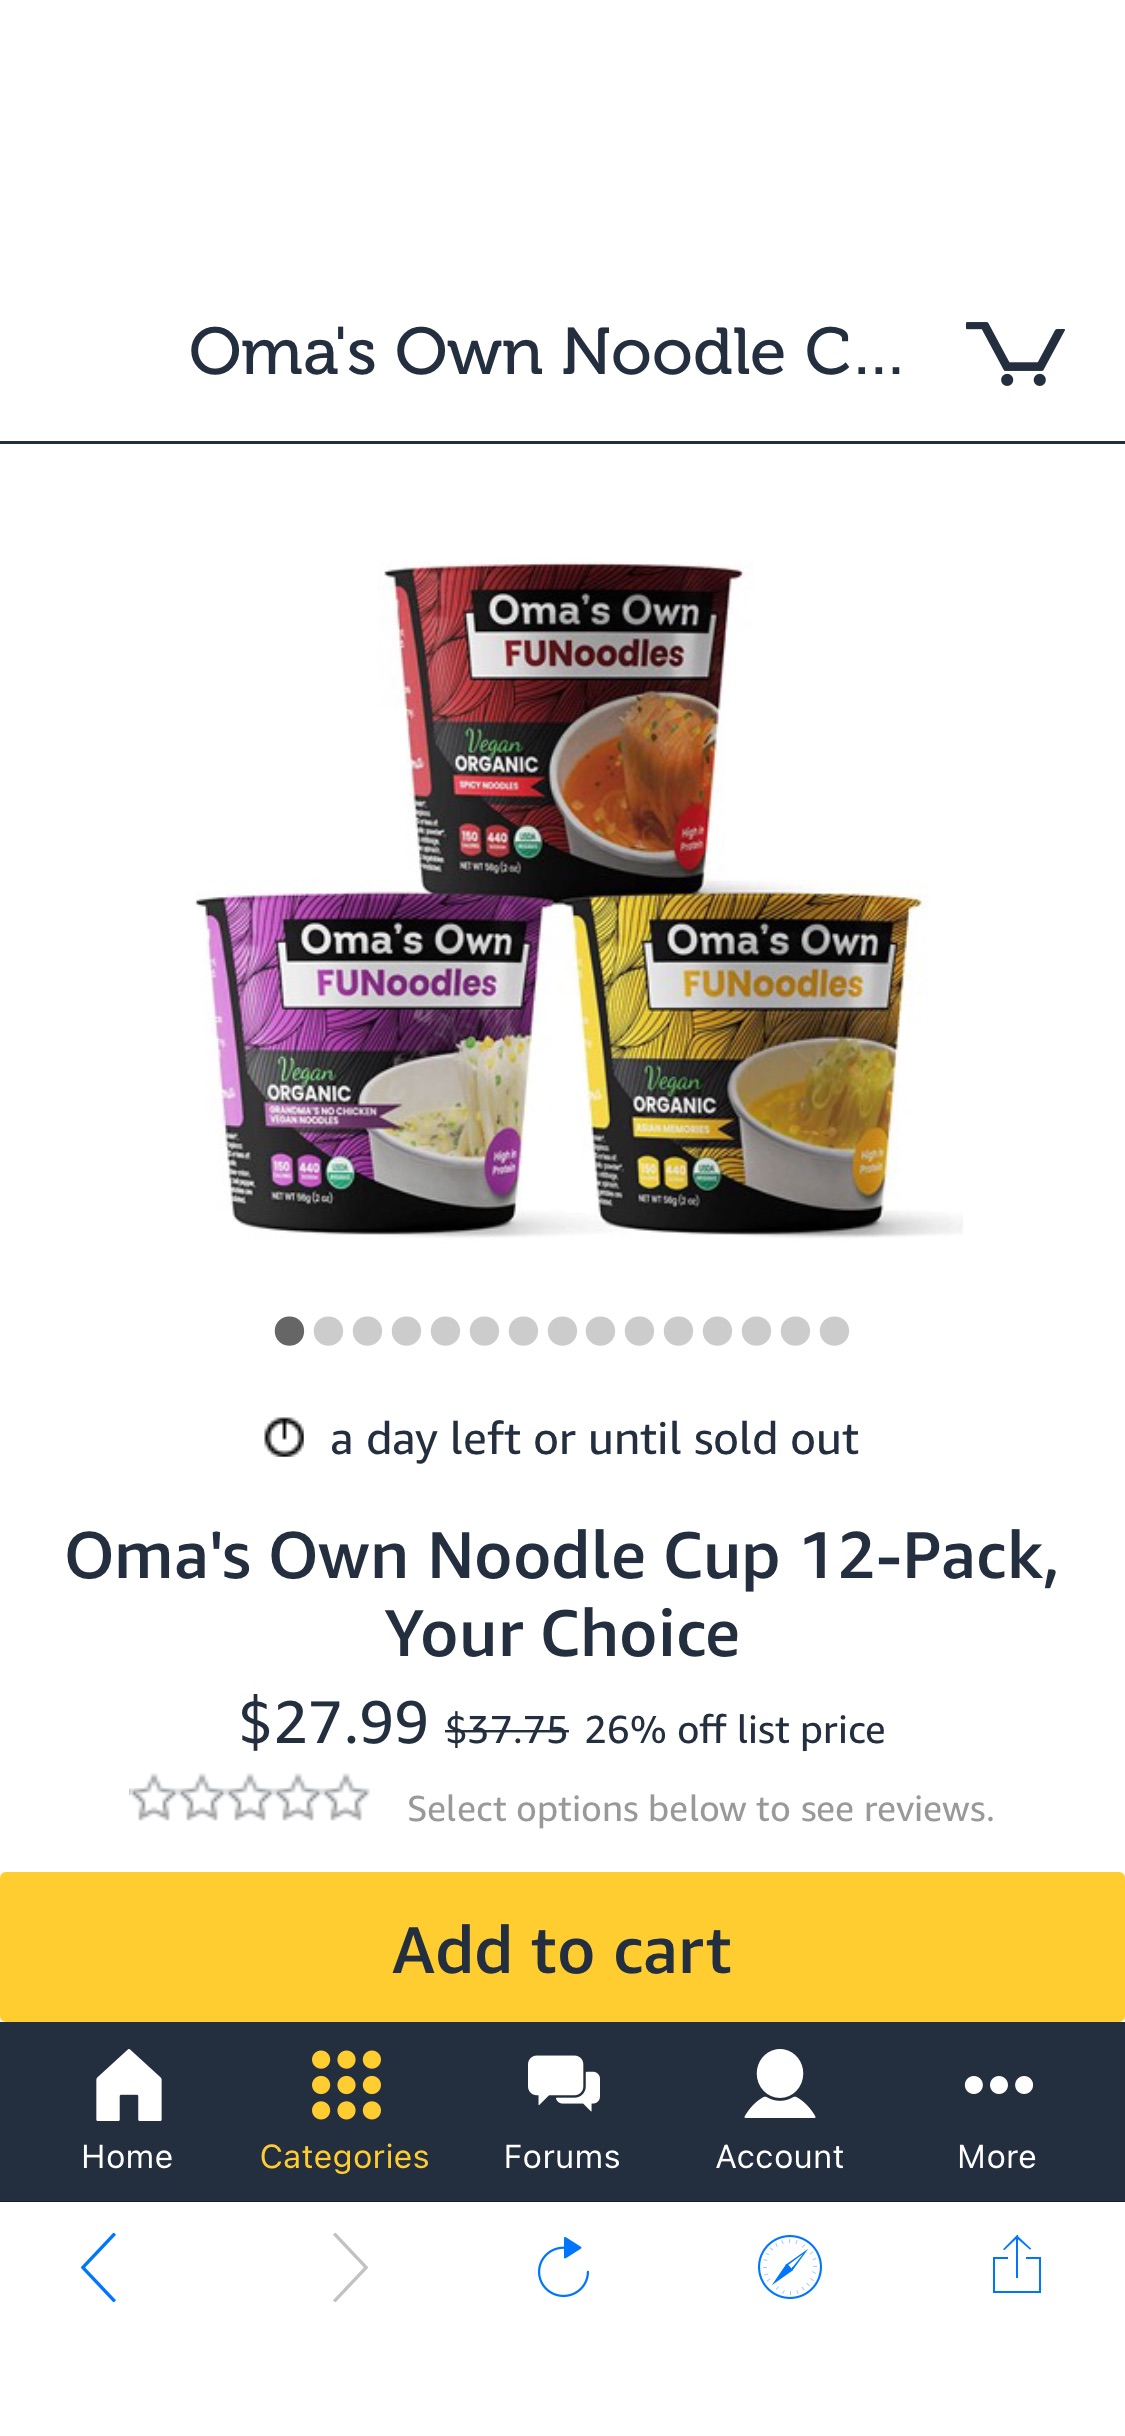 Oma's Own Noodle Cup 12-Pack, Your Choice 促销